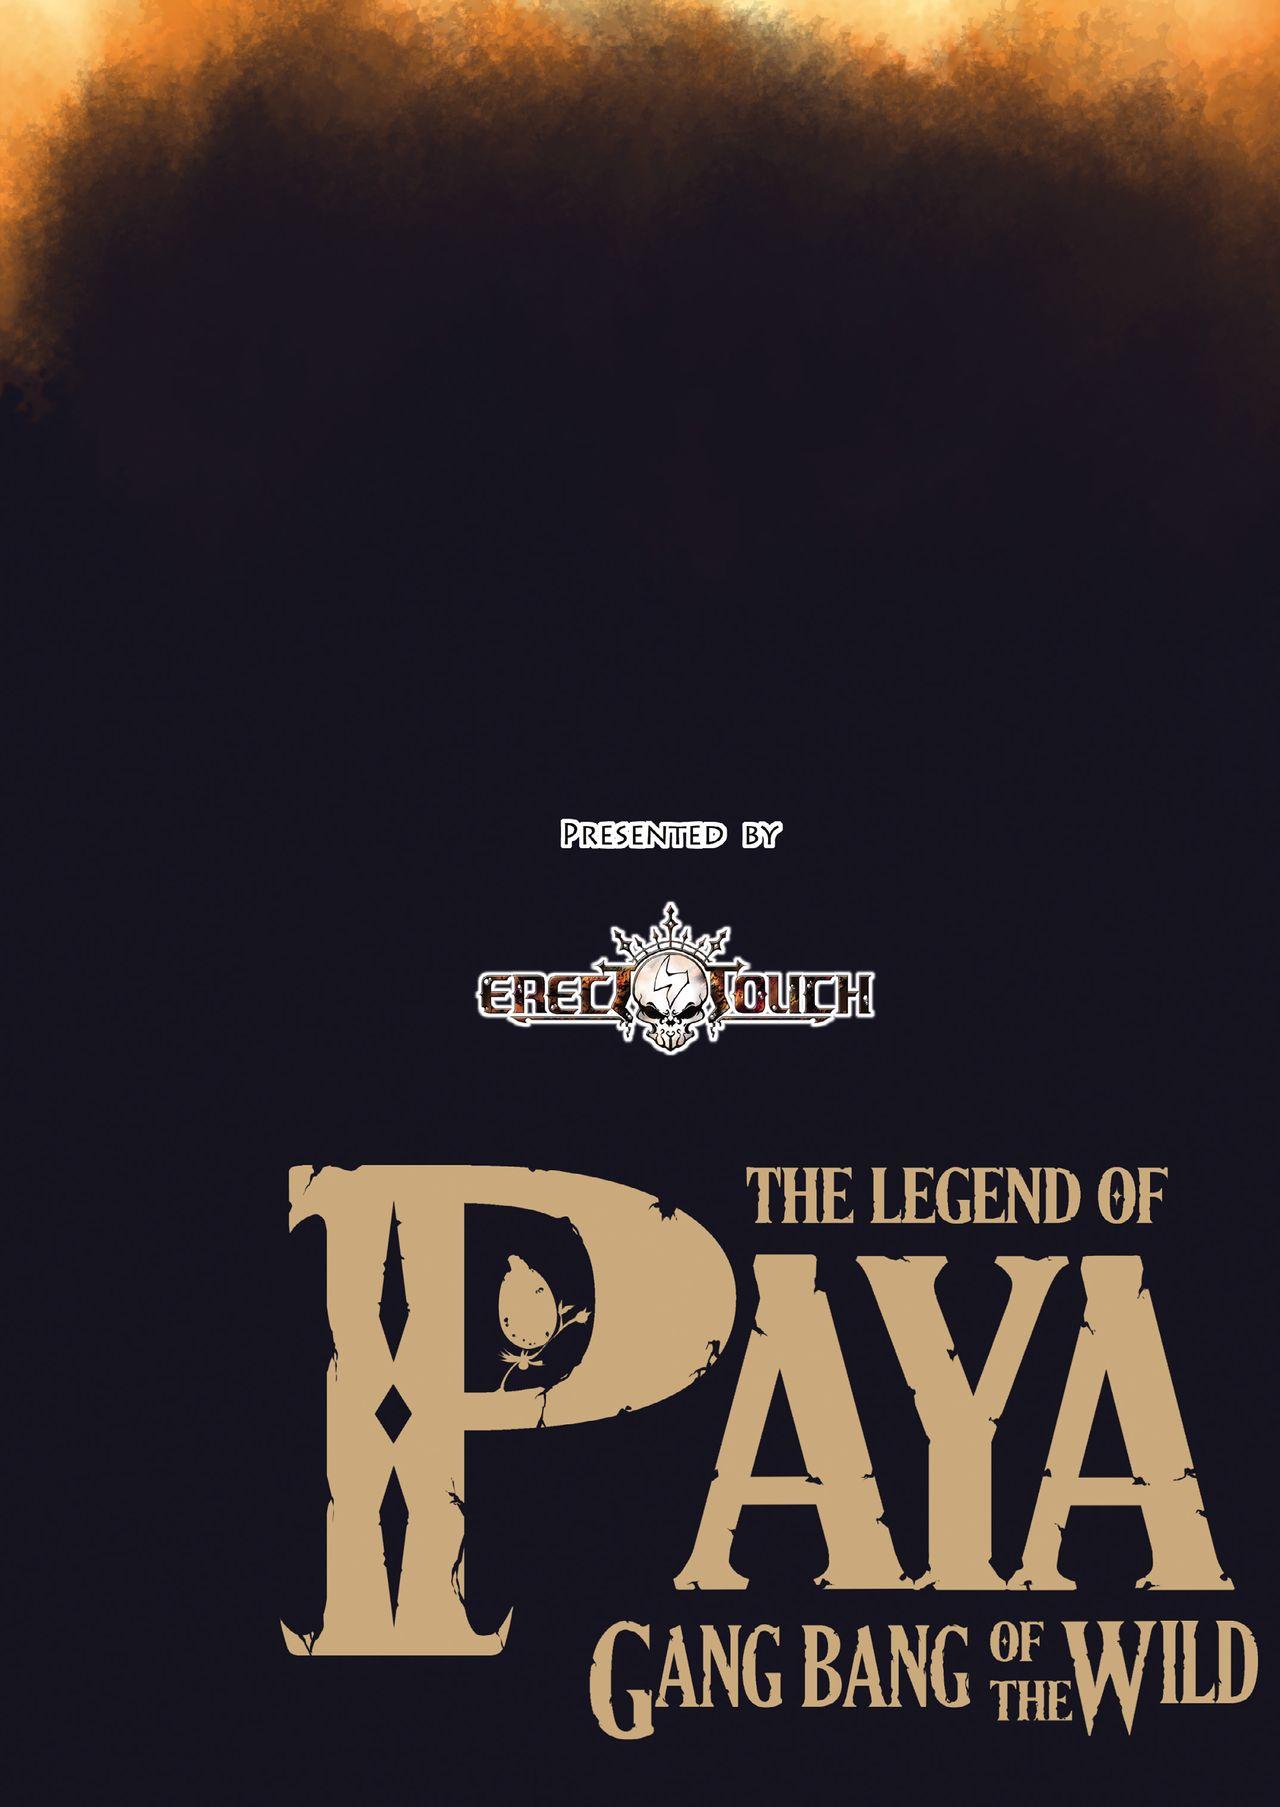 Freak THE LEGEND OF PAYA GANG BANG OF THE WILD - The legend of zelda Self - Page 28